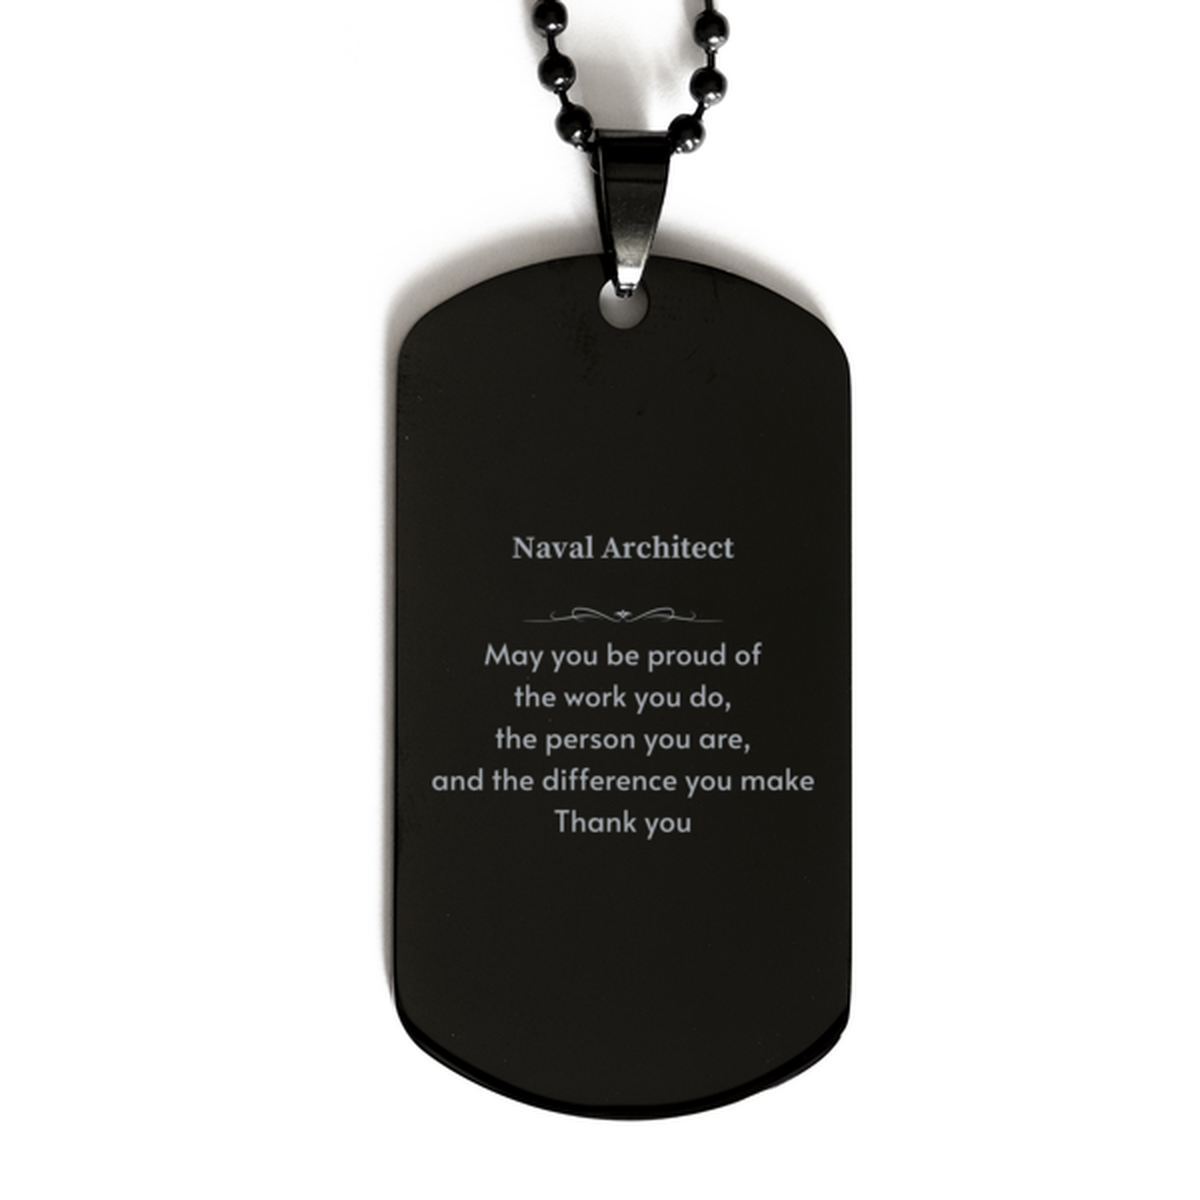 Heartwarming Black Dog Tag Retirement Coworkers Gifts for Naval Architect, Naval Architect May You be proud of the work you do, the person you are Gifts for Boss Men Women Friends